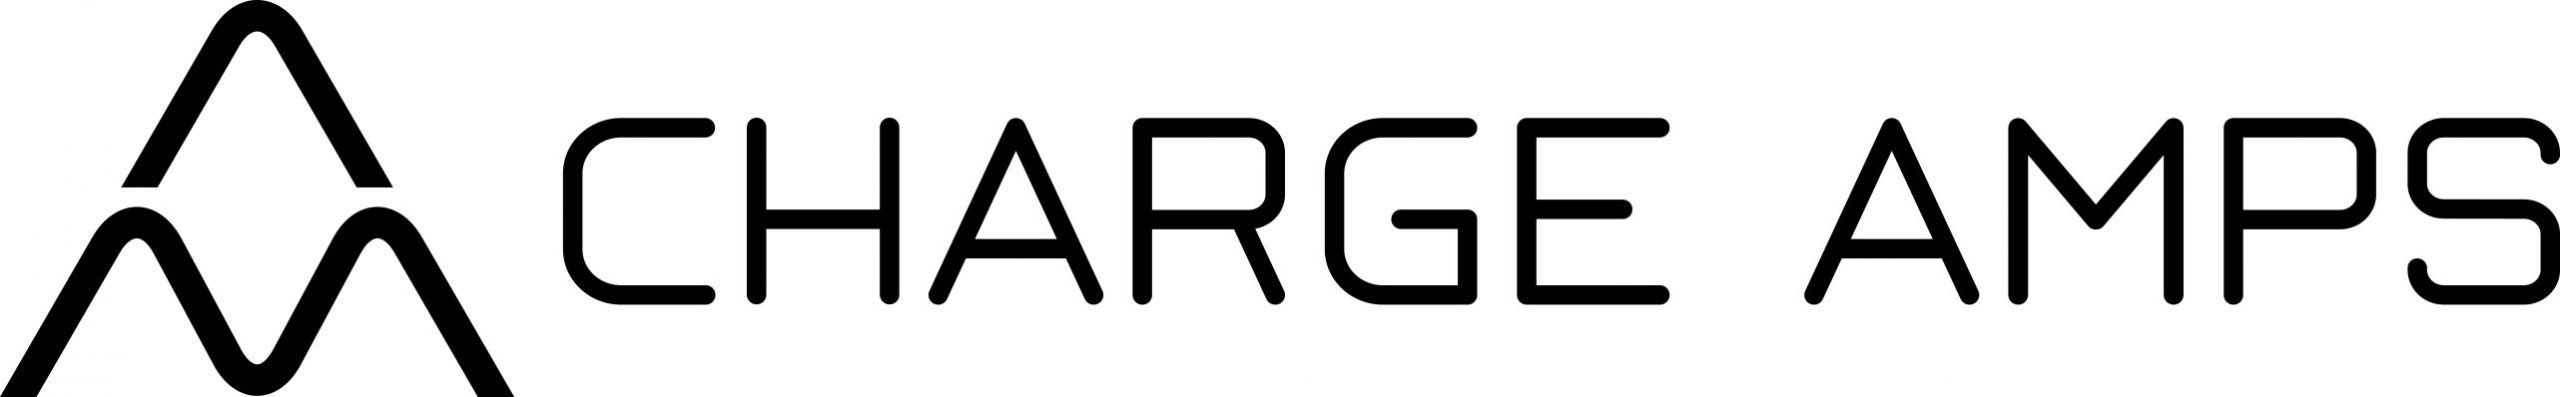 Charge Amps Logo